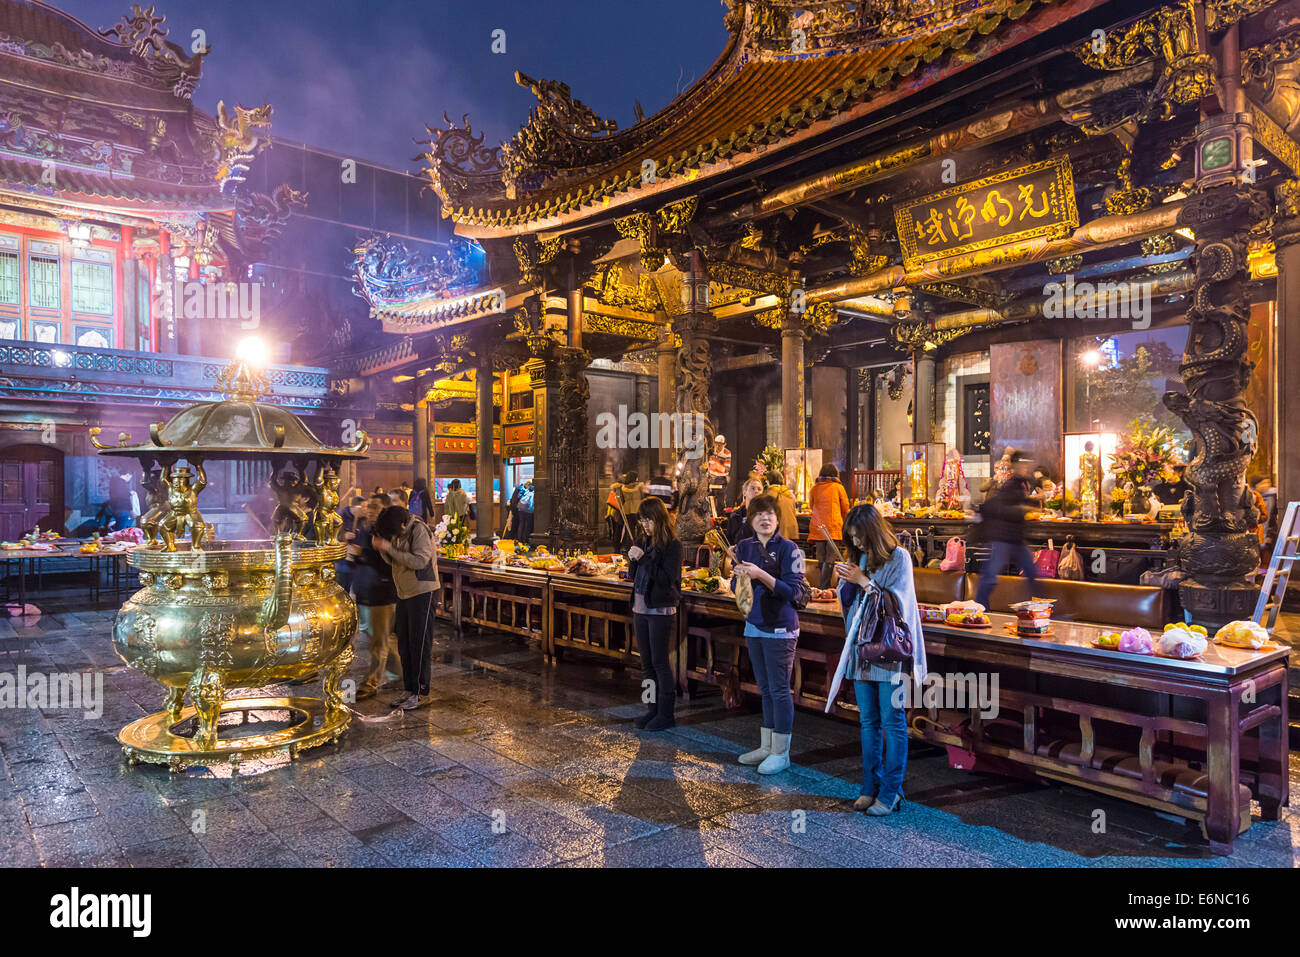 TAIPEI, TAIWAN - JANUARY 12, 2013: Worshippers at Longshan Temple. The temple was built in 1738 by settlers from Fujian. Stock Photo